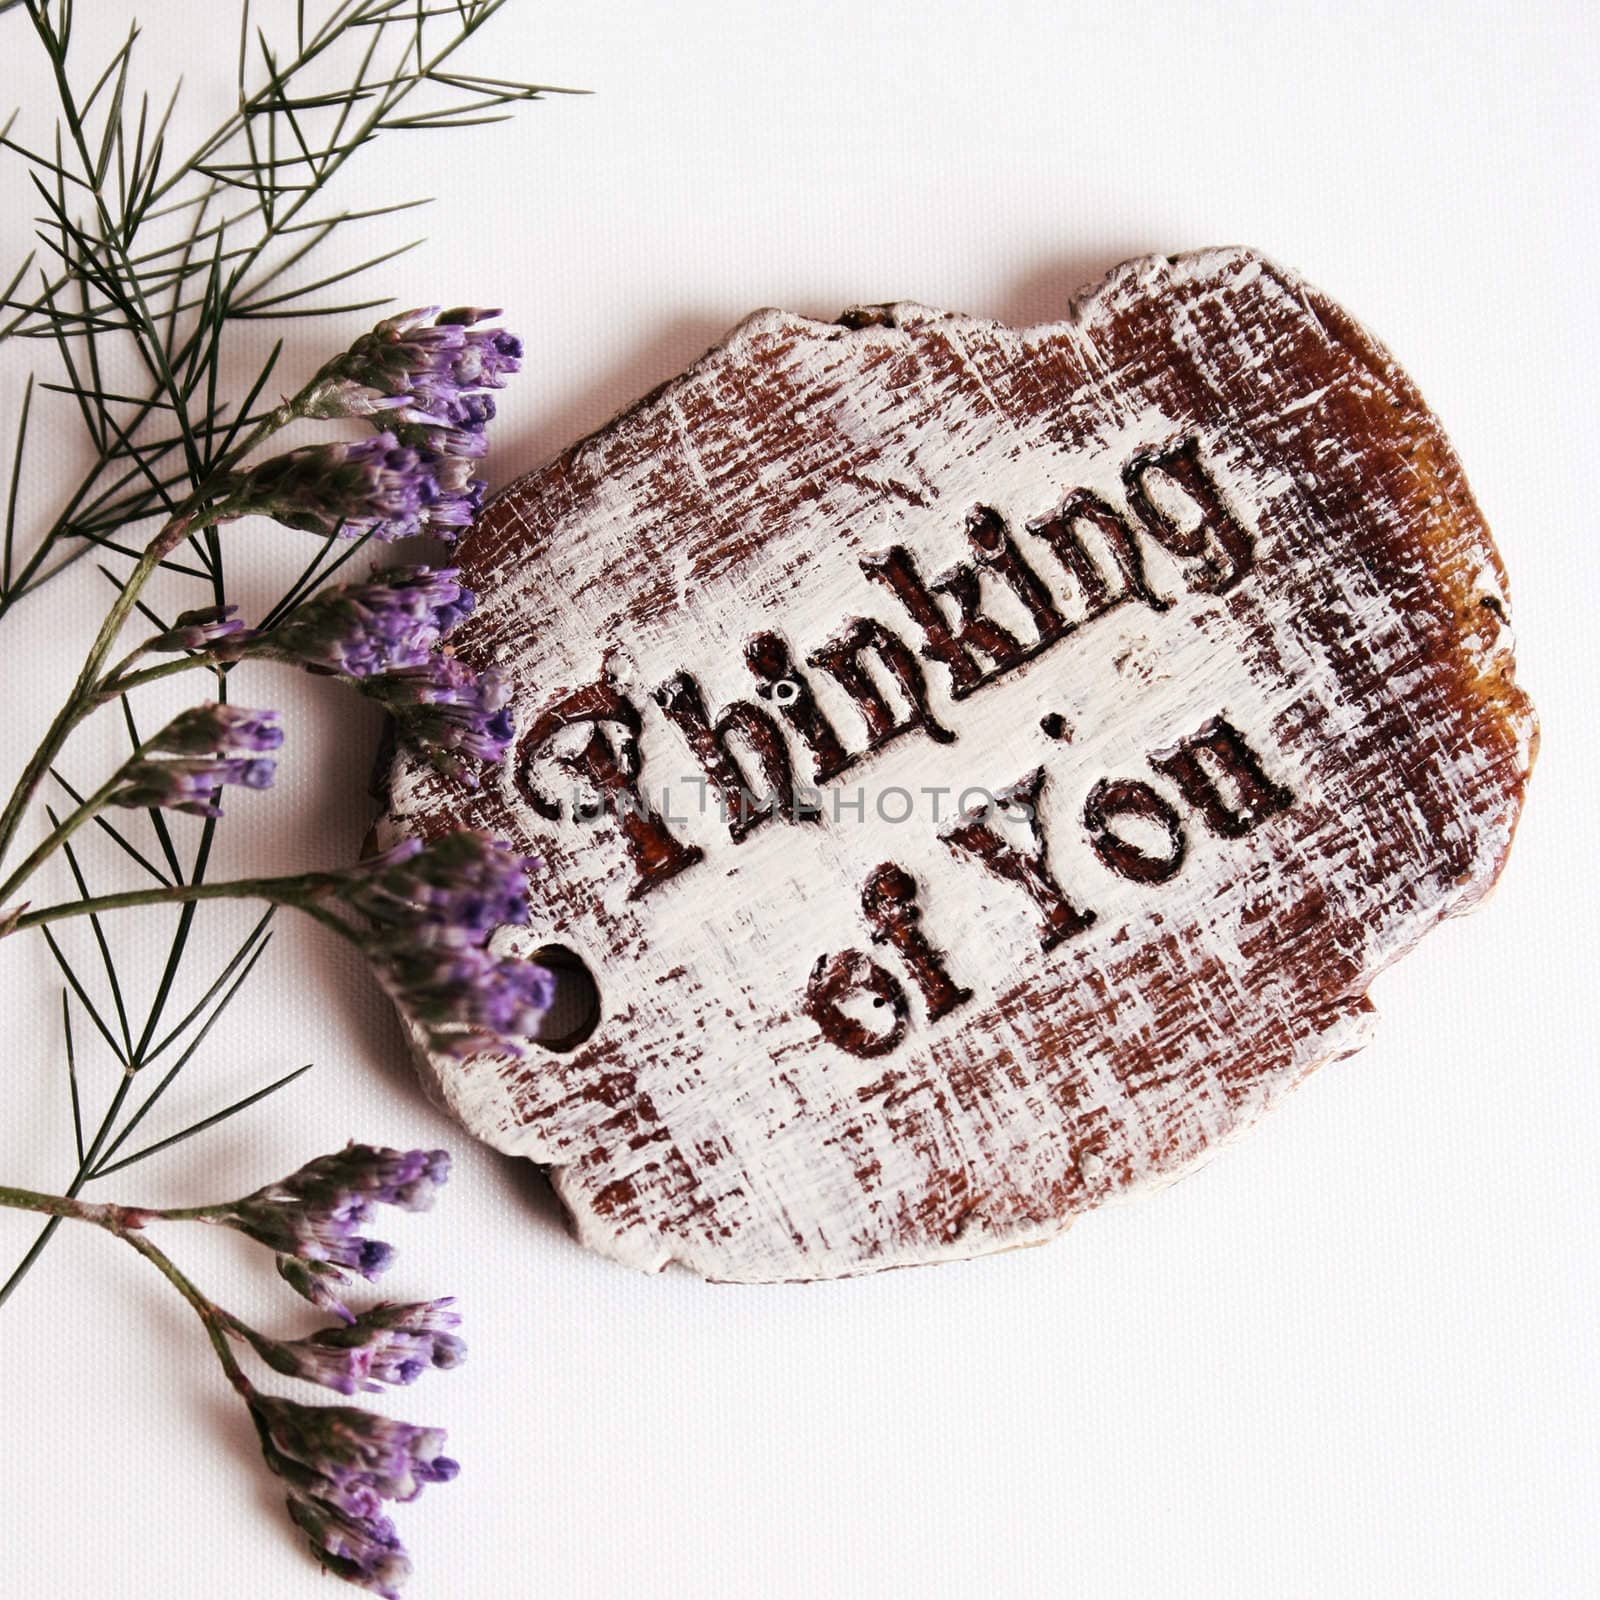 The words Thinking Of You engraved on a small wooden plaque